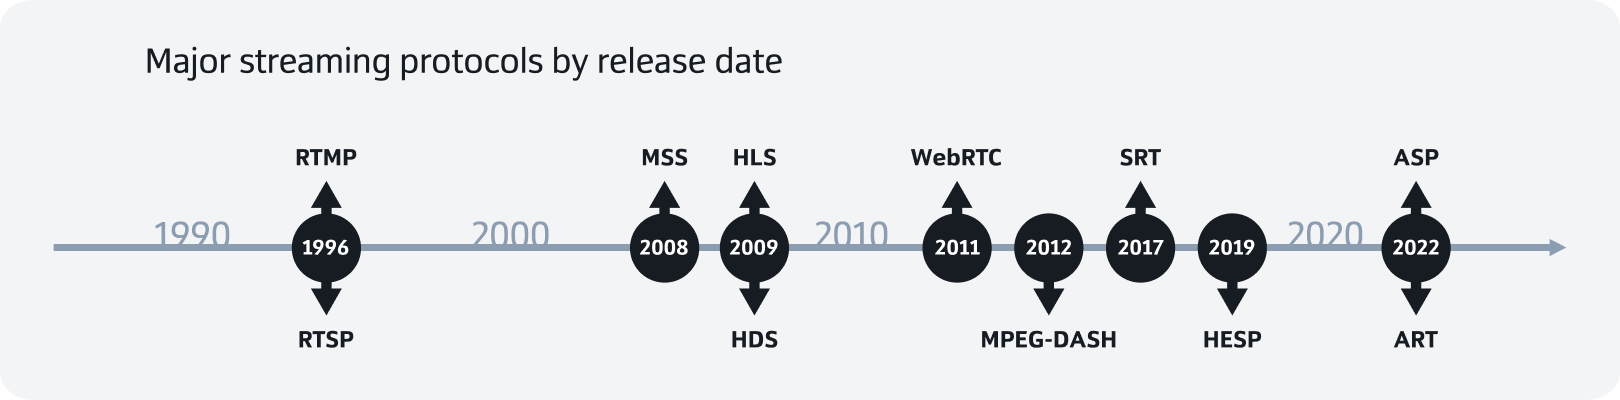 Major streaming protocols by release date